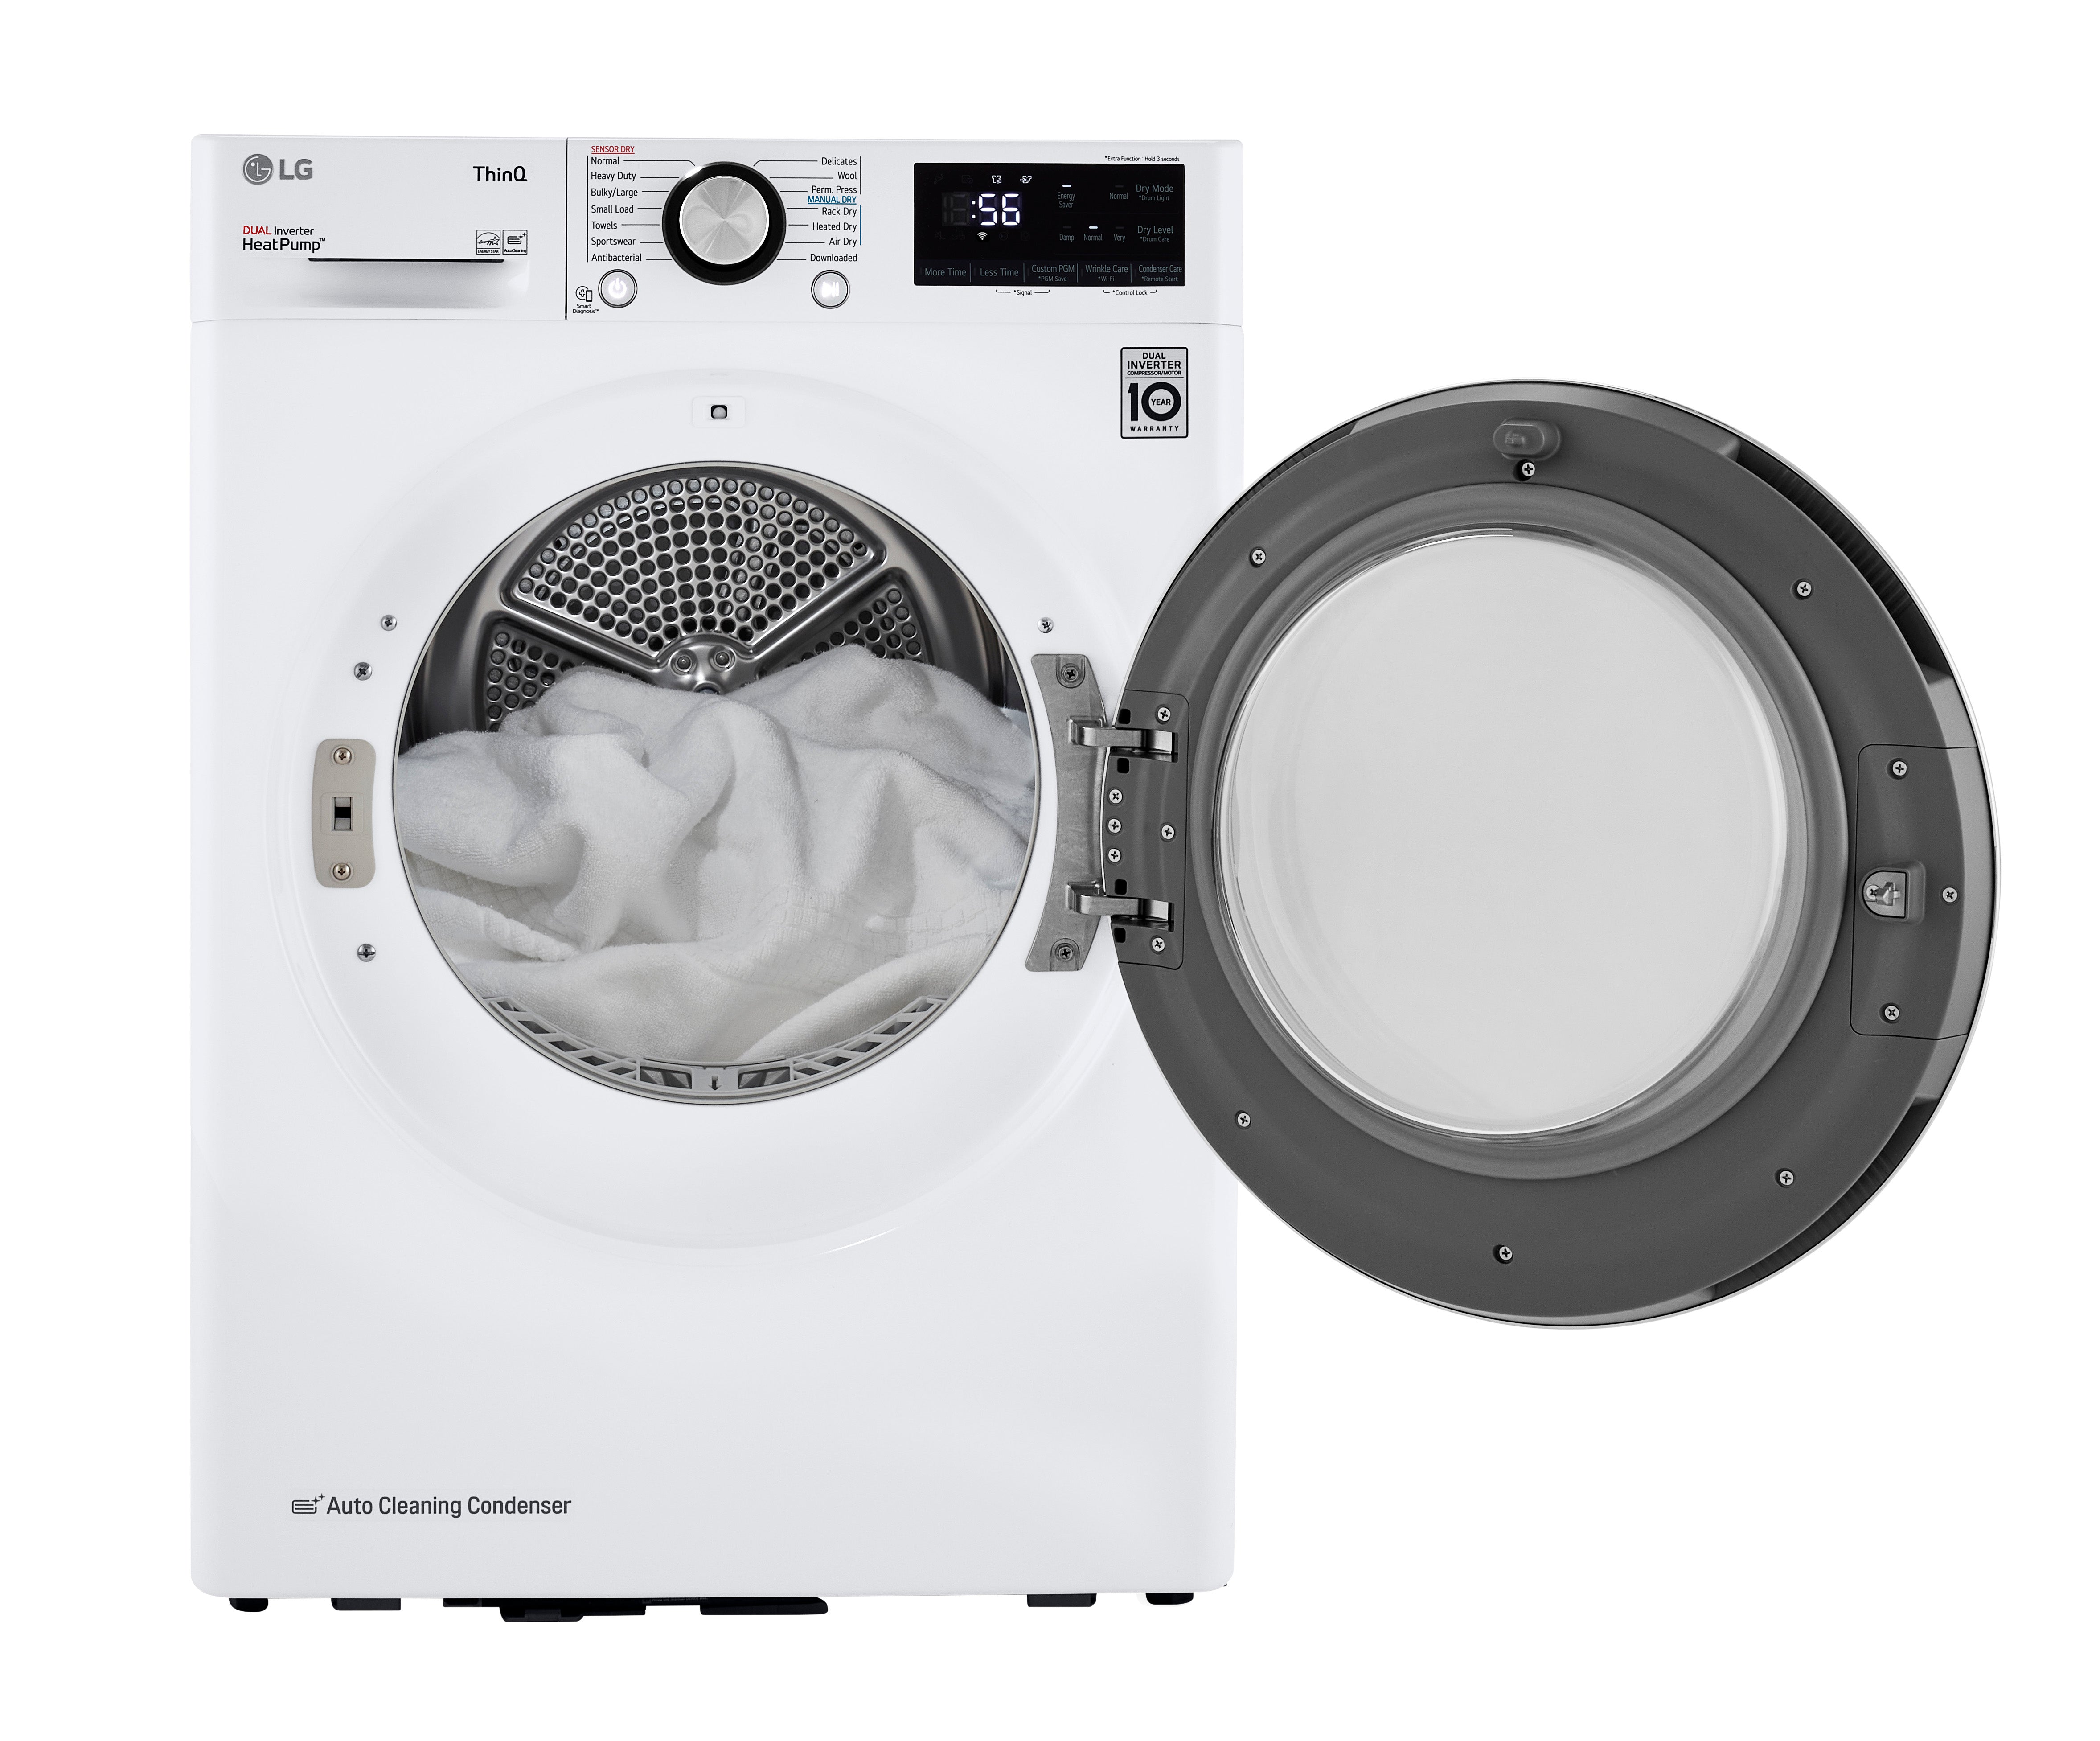 LG - 4.2 cu. Ft  Compact Dryer in White - DLHC1455W